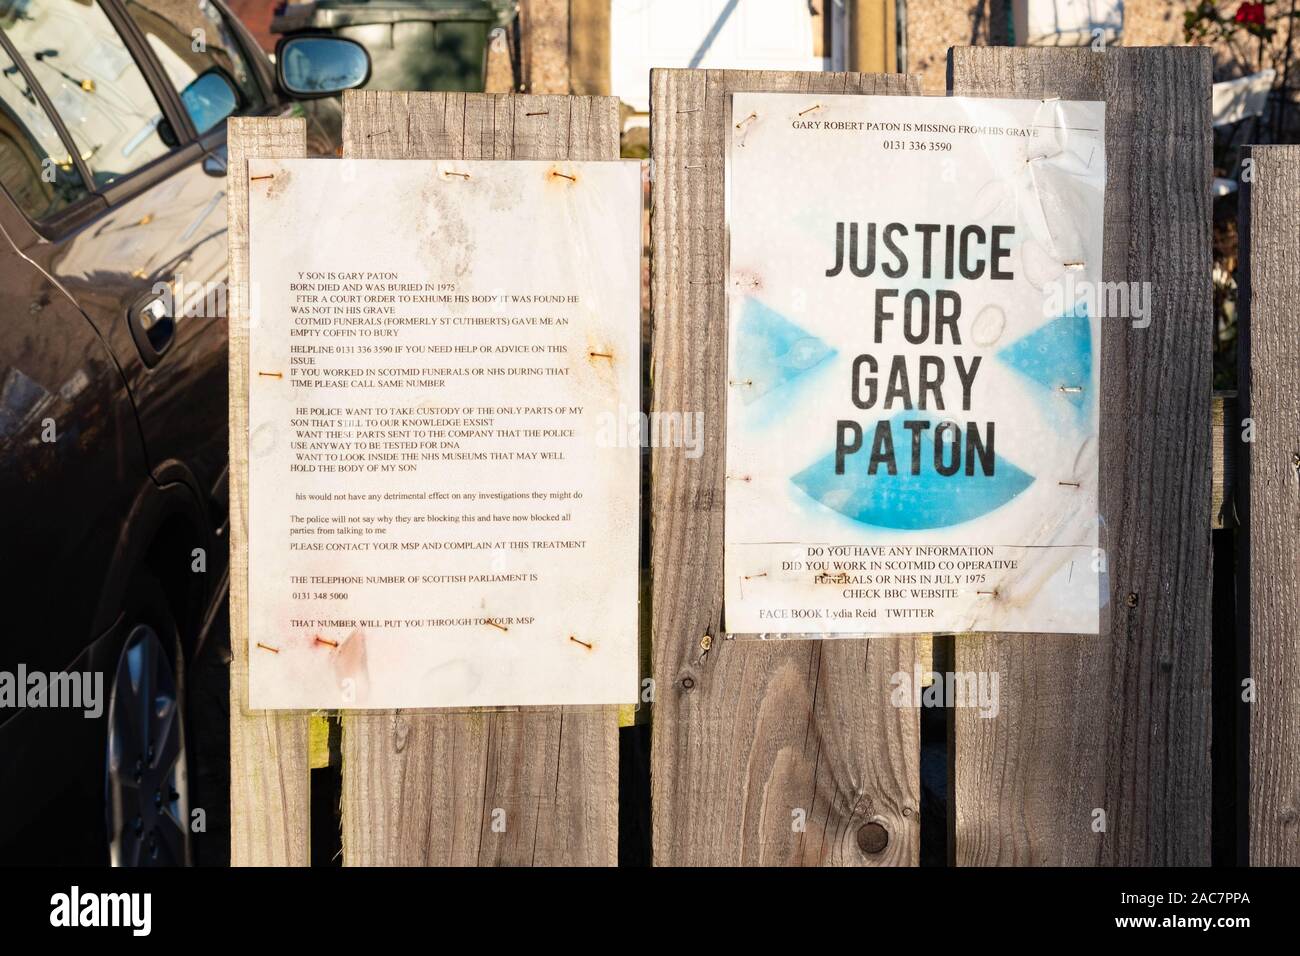 NHS Lothian organ retention scandal - Justice for Gary Paton posters on garden fence, Scotland, UK Stock Photo